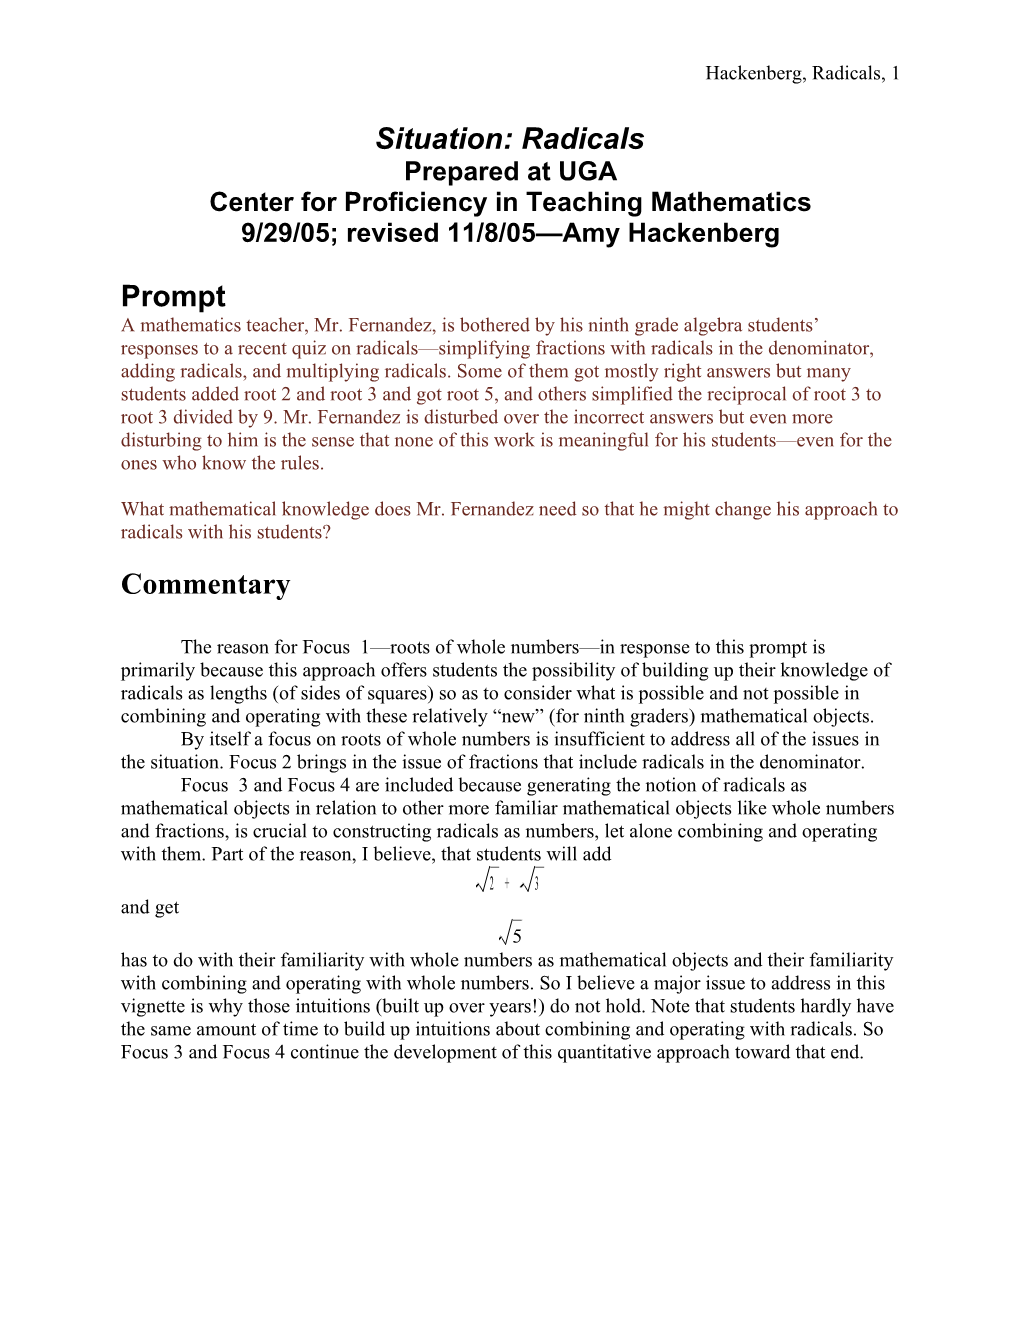 Center for Proficiency in Teaching Mathematics